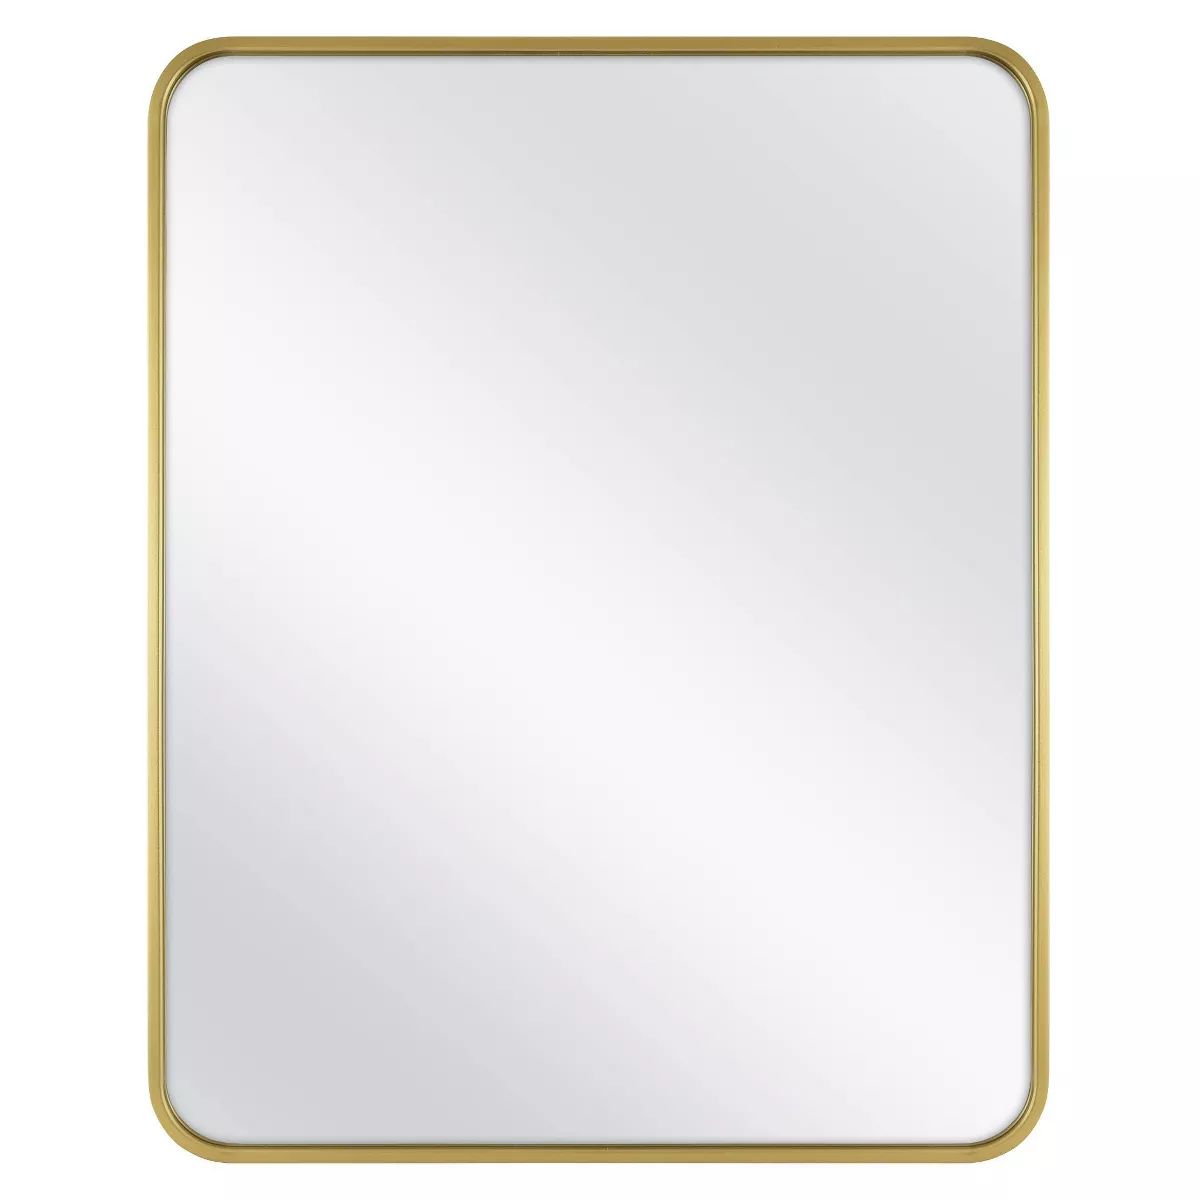 30" x 24" Rectangular Decorative Wall Mirror with Rounded Corners Brass - Project 62™ | Target